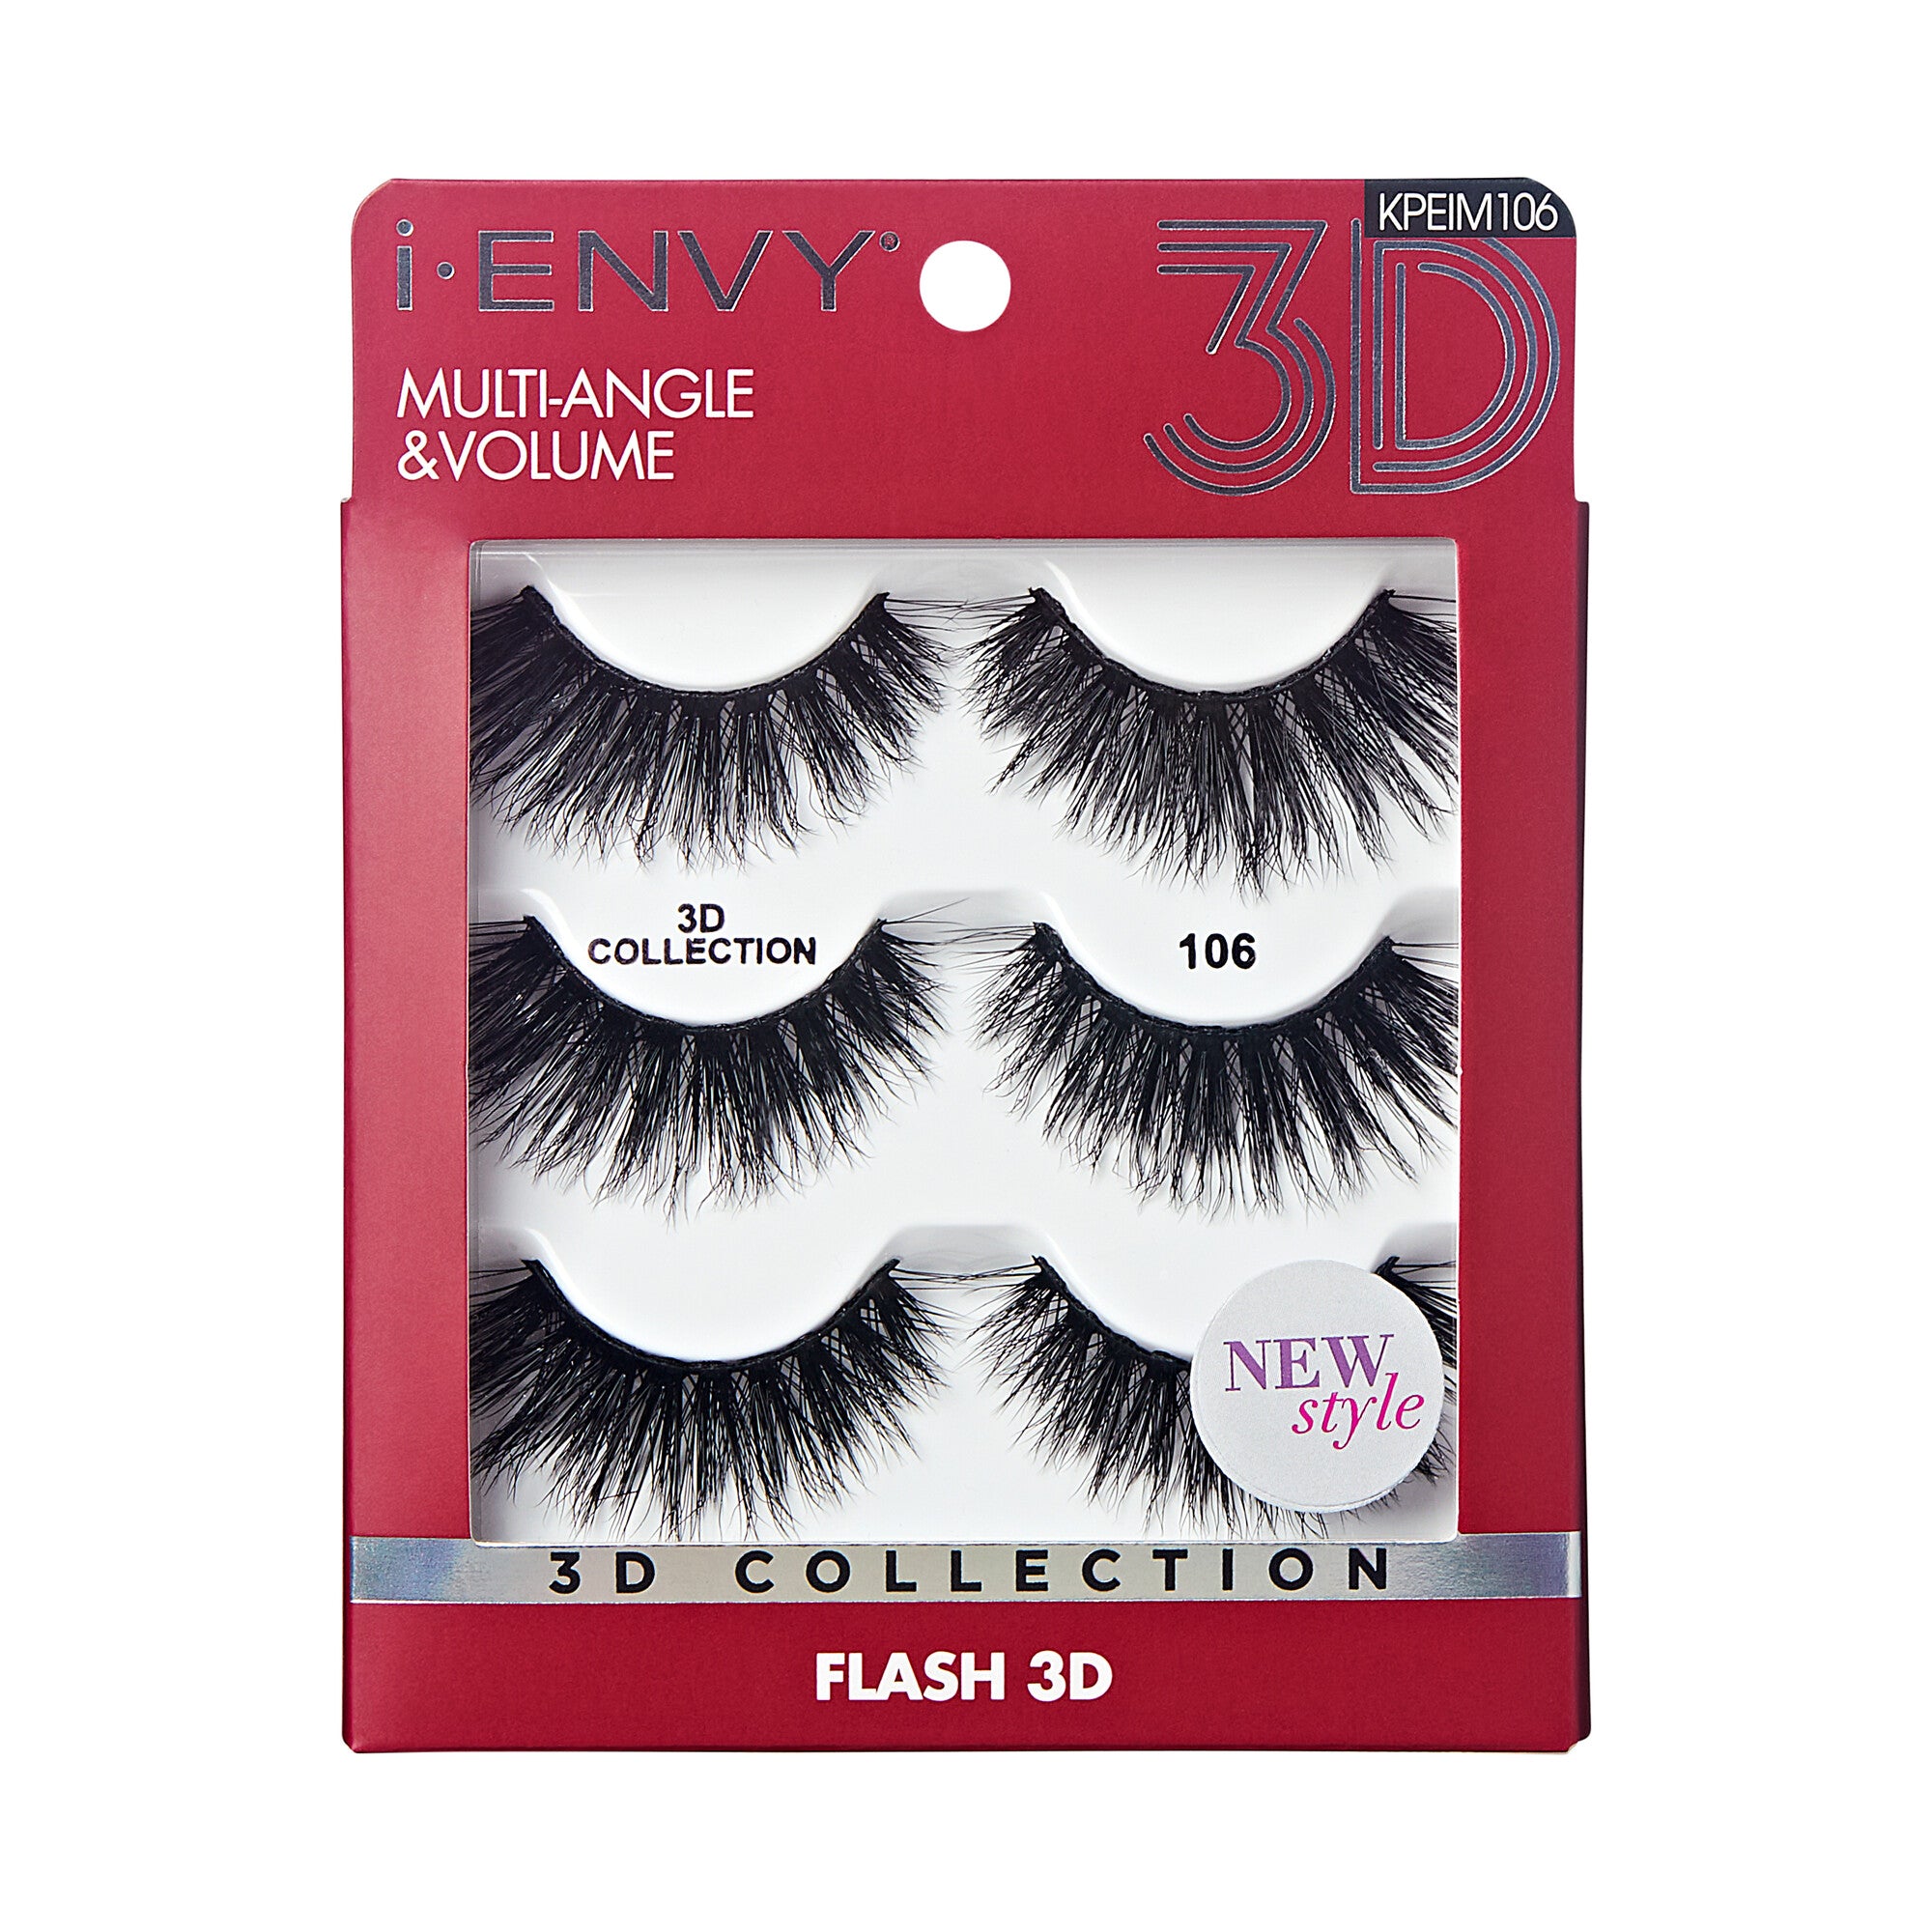 I.Envy By Kiss 3D Lashes Multi Pack Multiangle & Volume Collection-106 (KPEIM106)